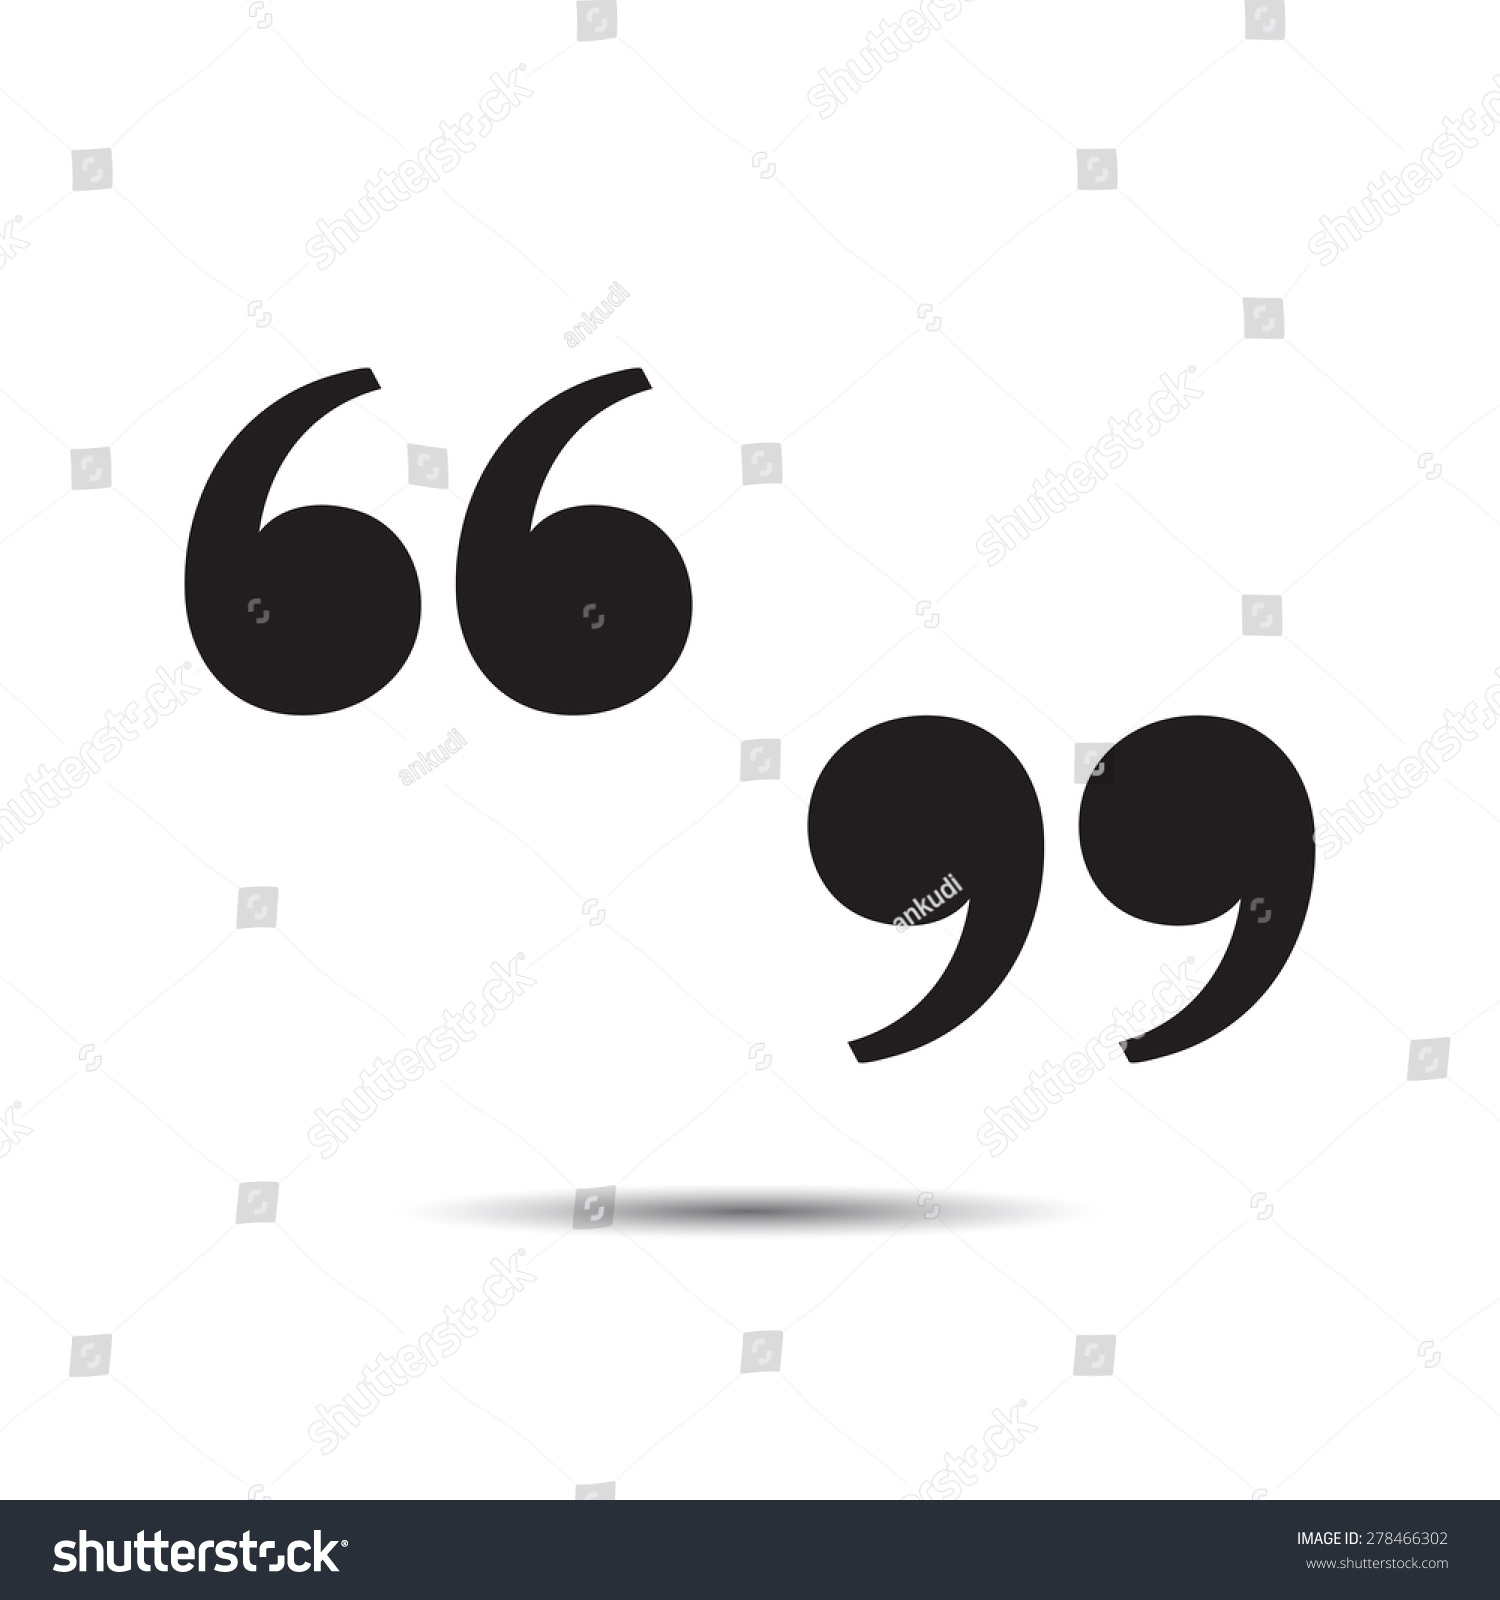 Download Quote Sign Icon Vector Stock Vector 278466302 - Shutterstock